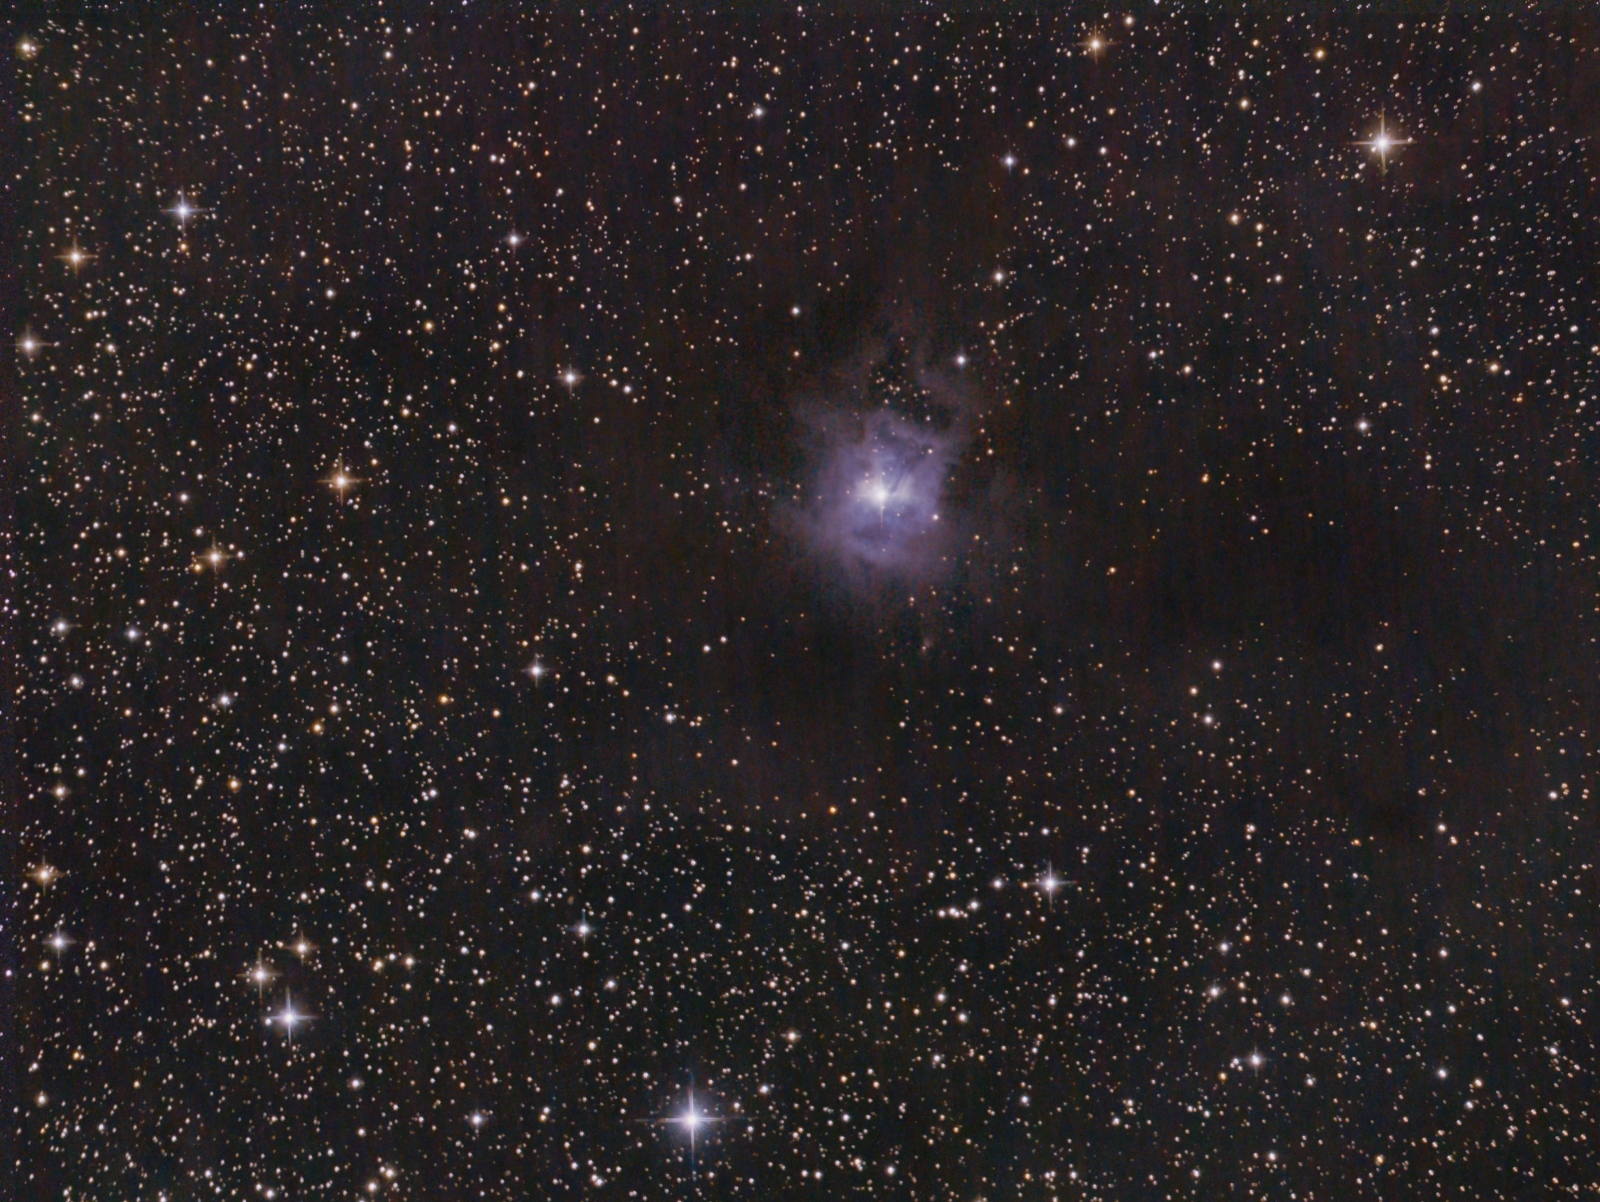 Reflex. nebula NGC 7023 from May 20th, 2018; 2x6" f/4 newtonians parallel; 275+272x30sec; Canon 750d + mod. 1100d, bortle 7-8; much coma, so a crop;